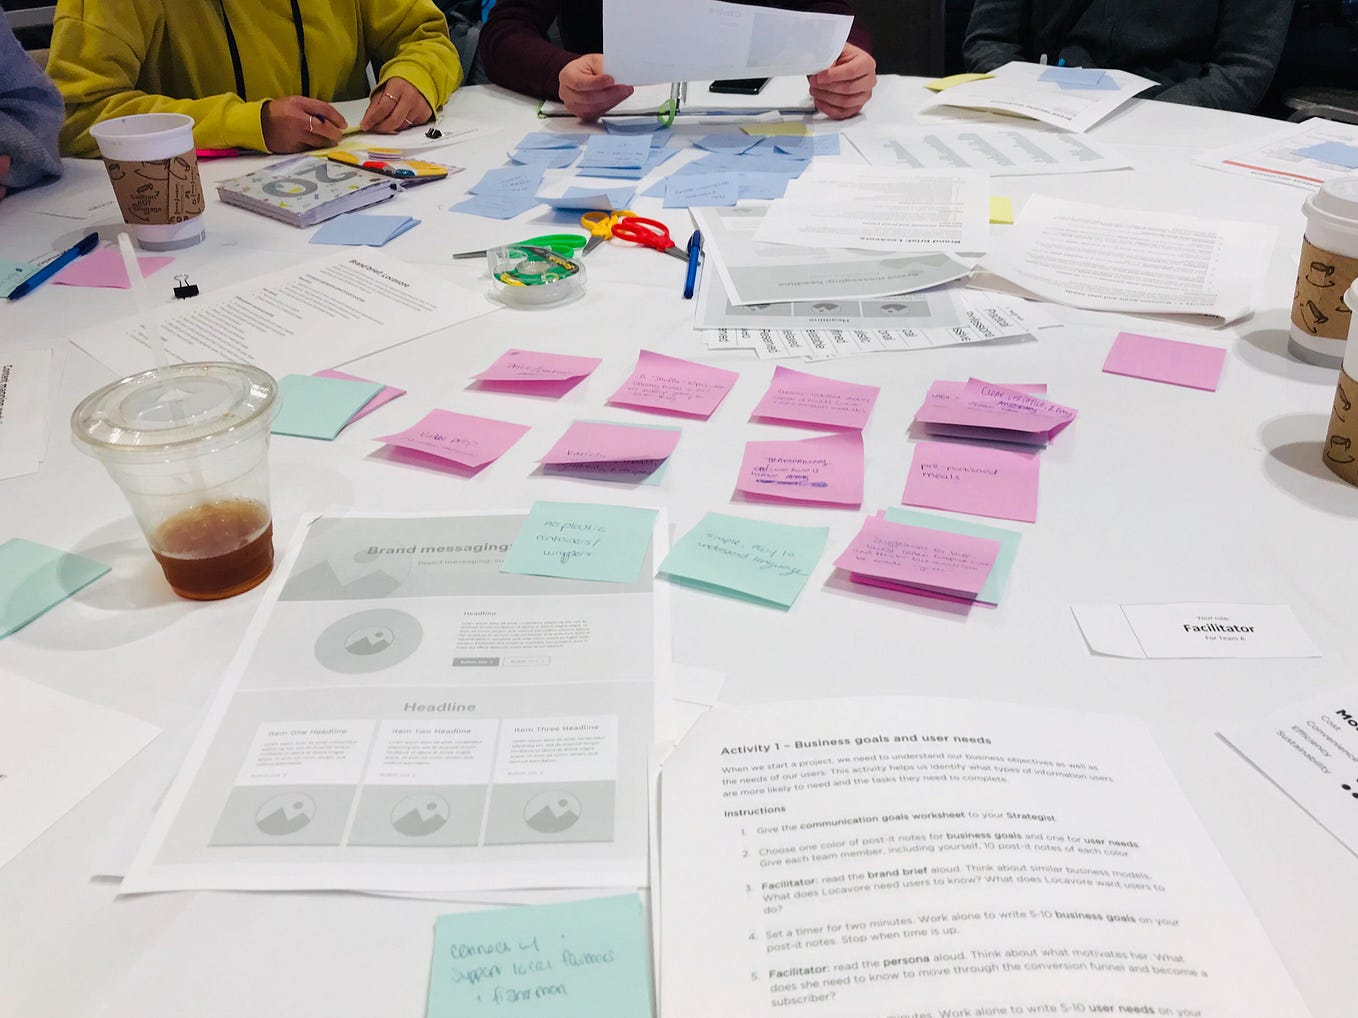 A workshop table covered in pieces of paper, post-it notes, markers, scissors, and coffee cups